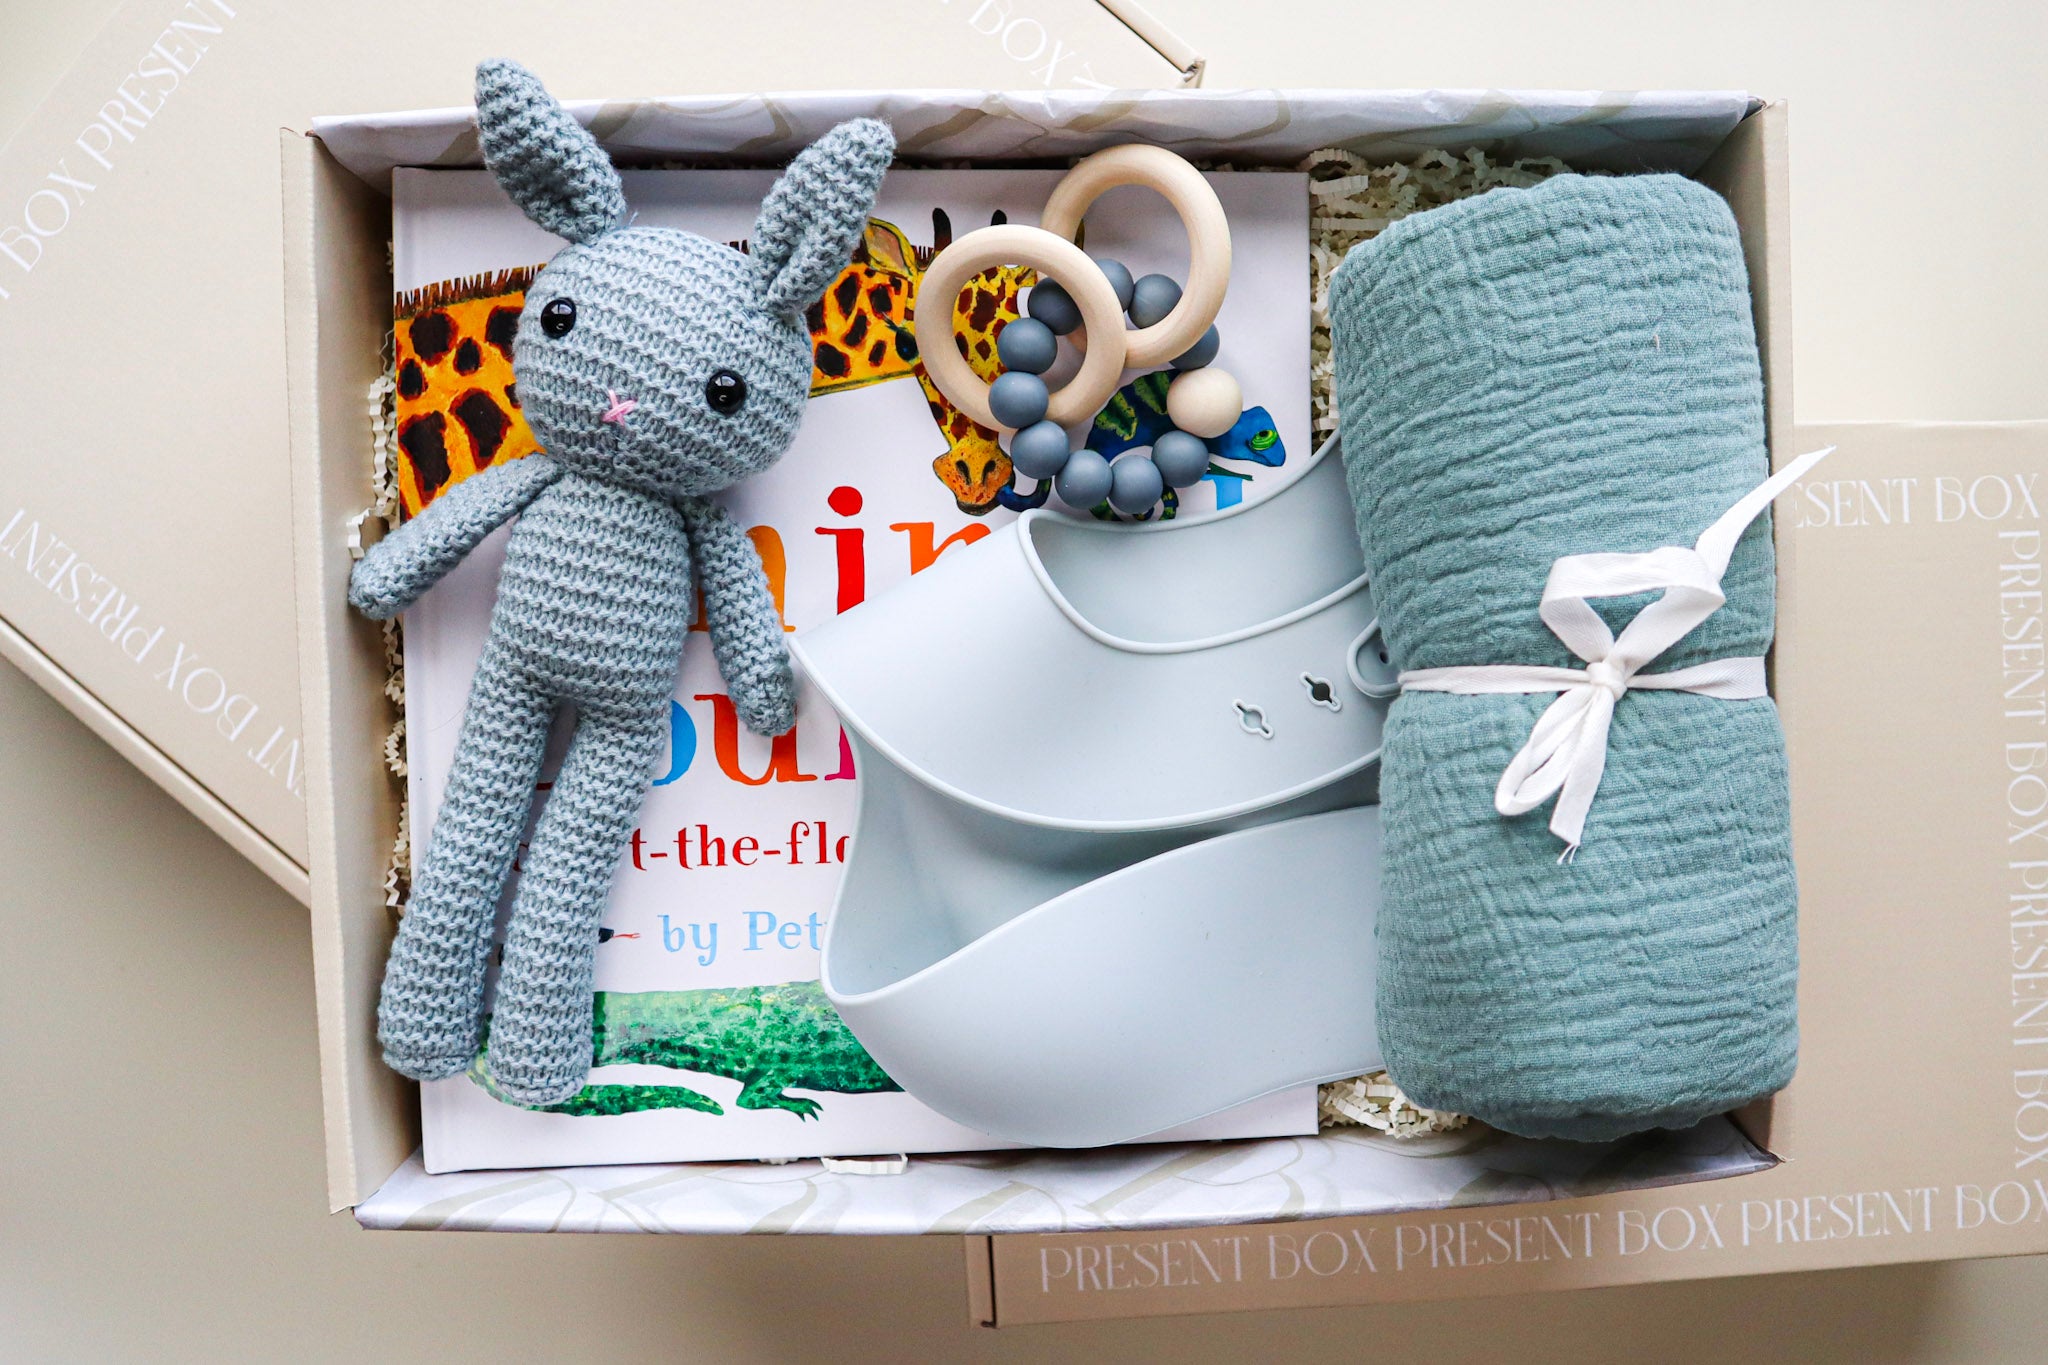 It's A Boy Gift Box is a cream cardboard box containing a blue, crocheted bunny, a light blue silicone bib, a blue cotton wrap rolled and tied with a white ribbon, a blue and natural coloured teether ring and rattle toy and a children's hardcover book titled Animal Counting